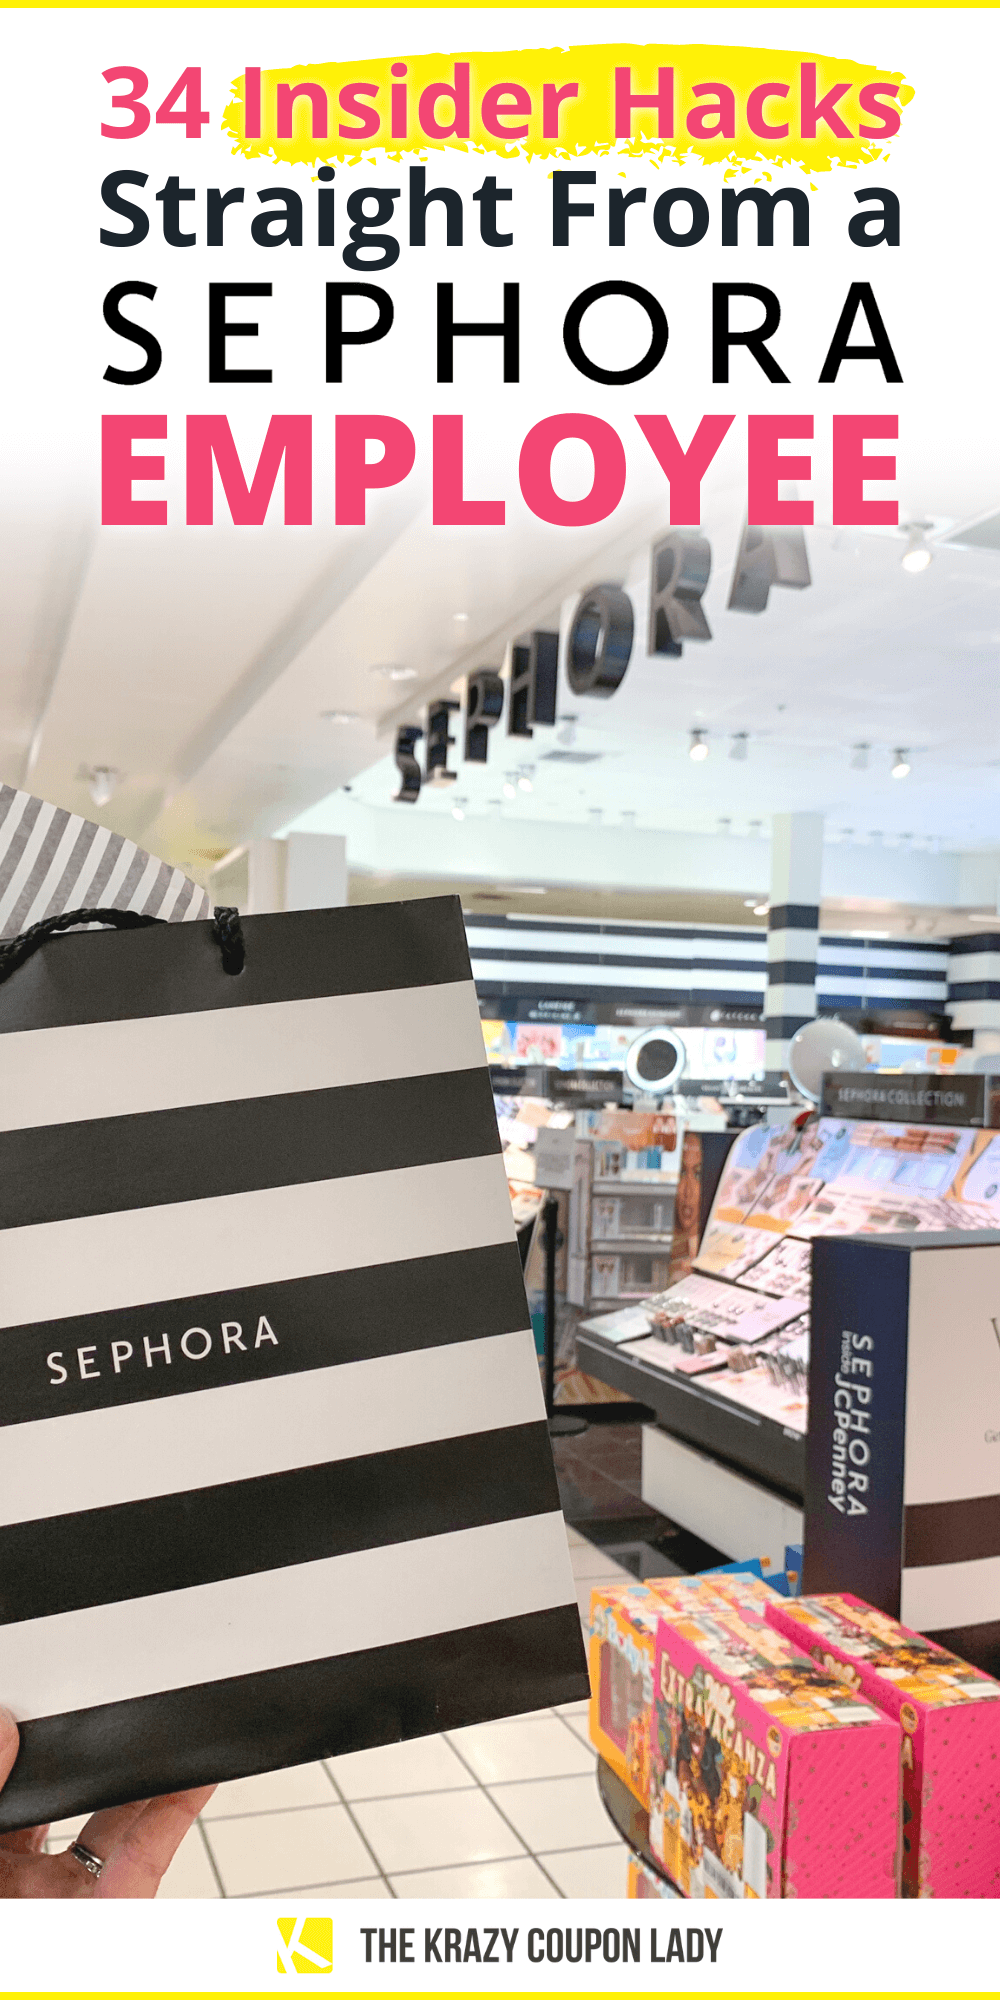 33 Insider Hacks from a Sephora Employee - The Krazy Coupon Lady